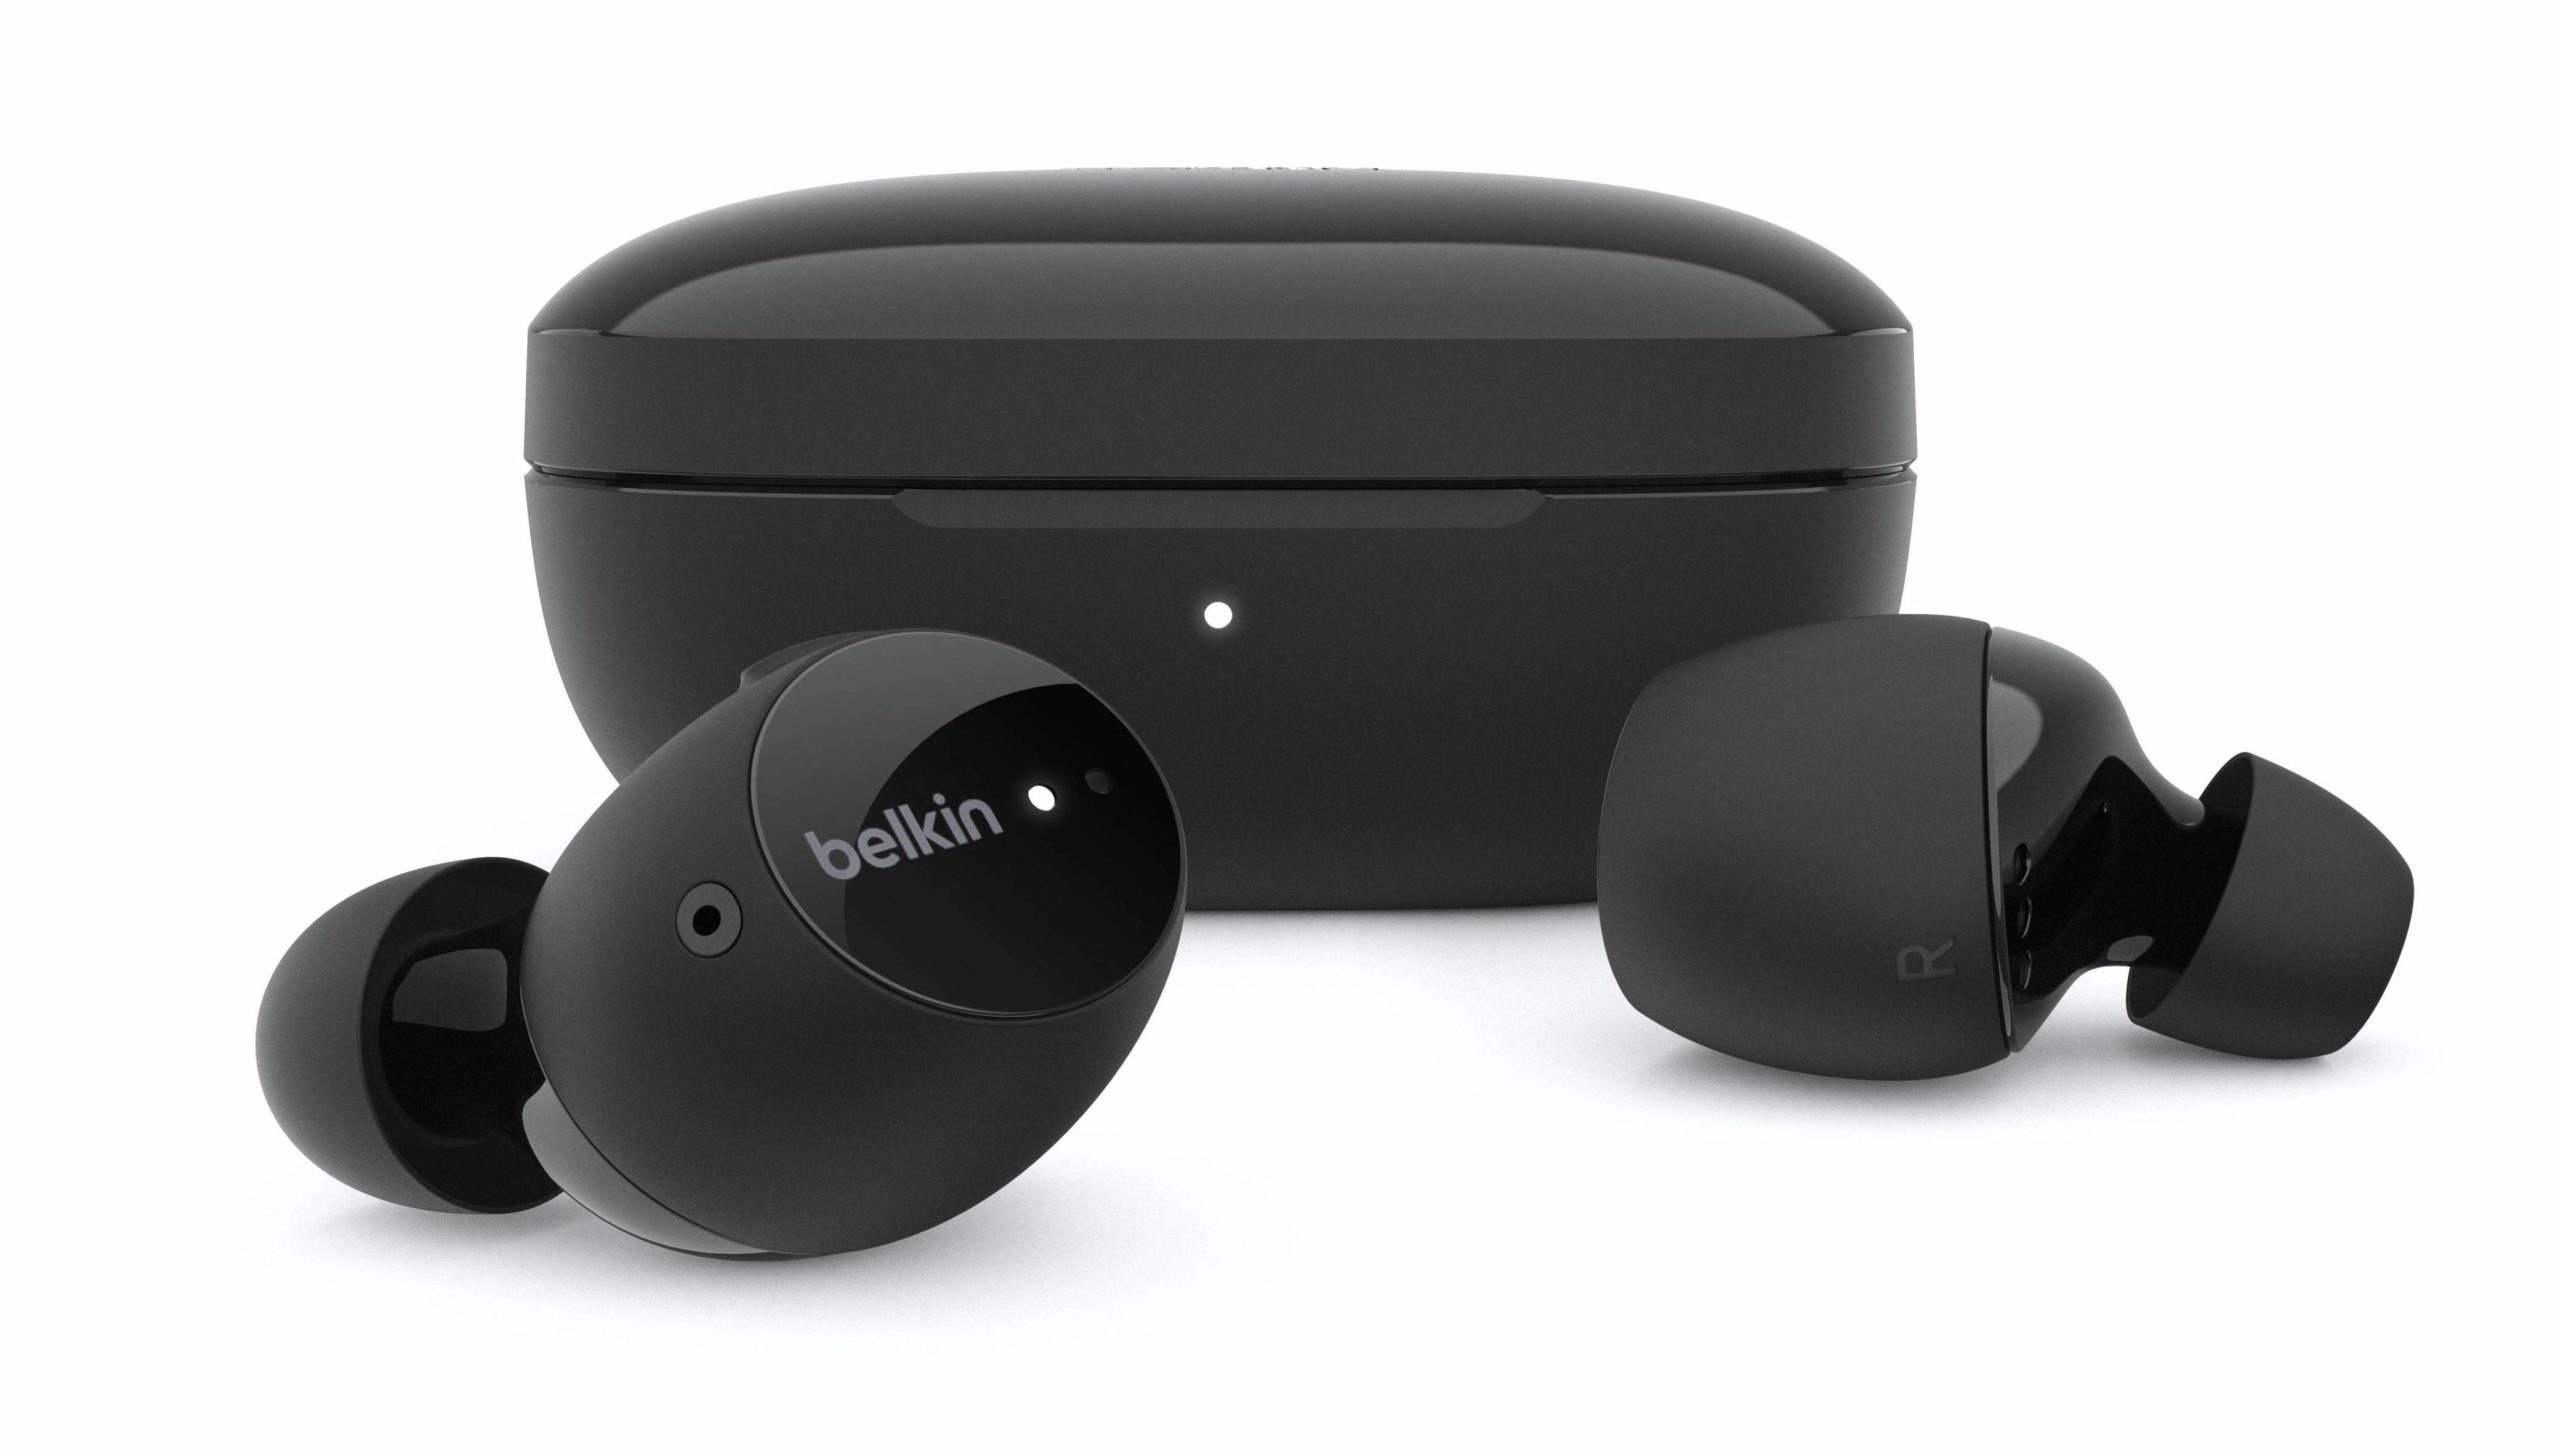 Belkin updates its SOUNDFORM audio range with new colours, expanded feature sets, and kid-friendly options